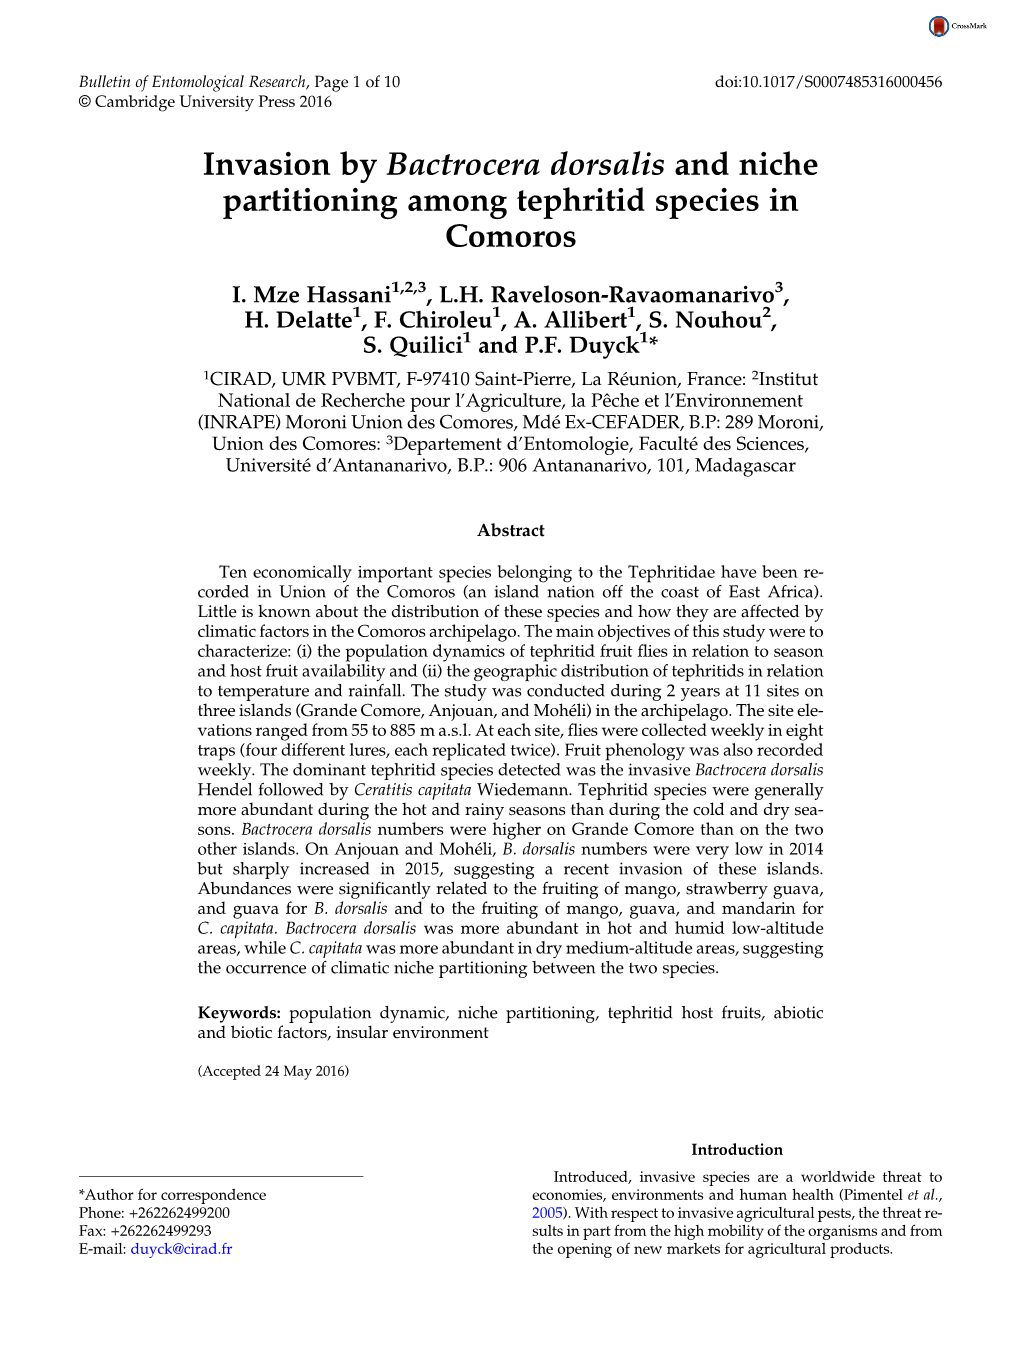 Bactrocera Dorsalis and Niche Partitioning Among Tephritid Species in Comoros